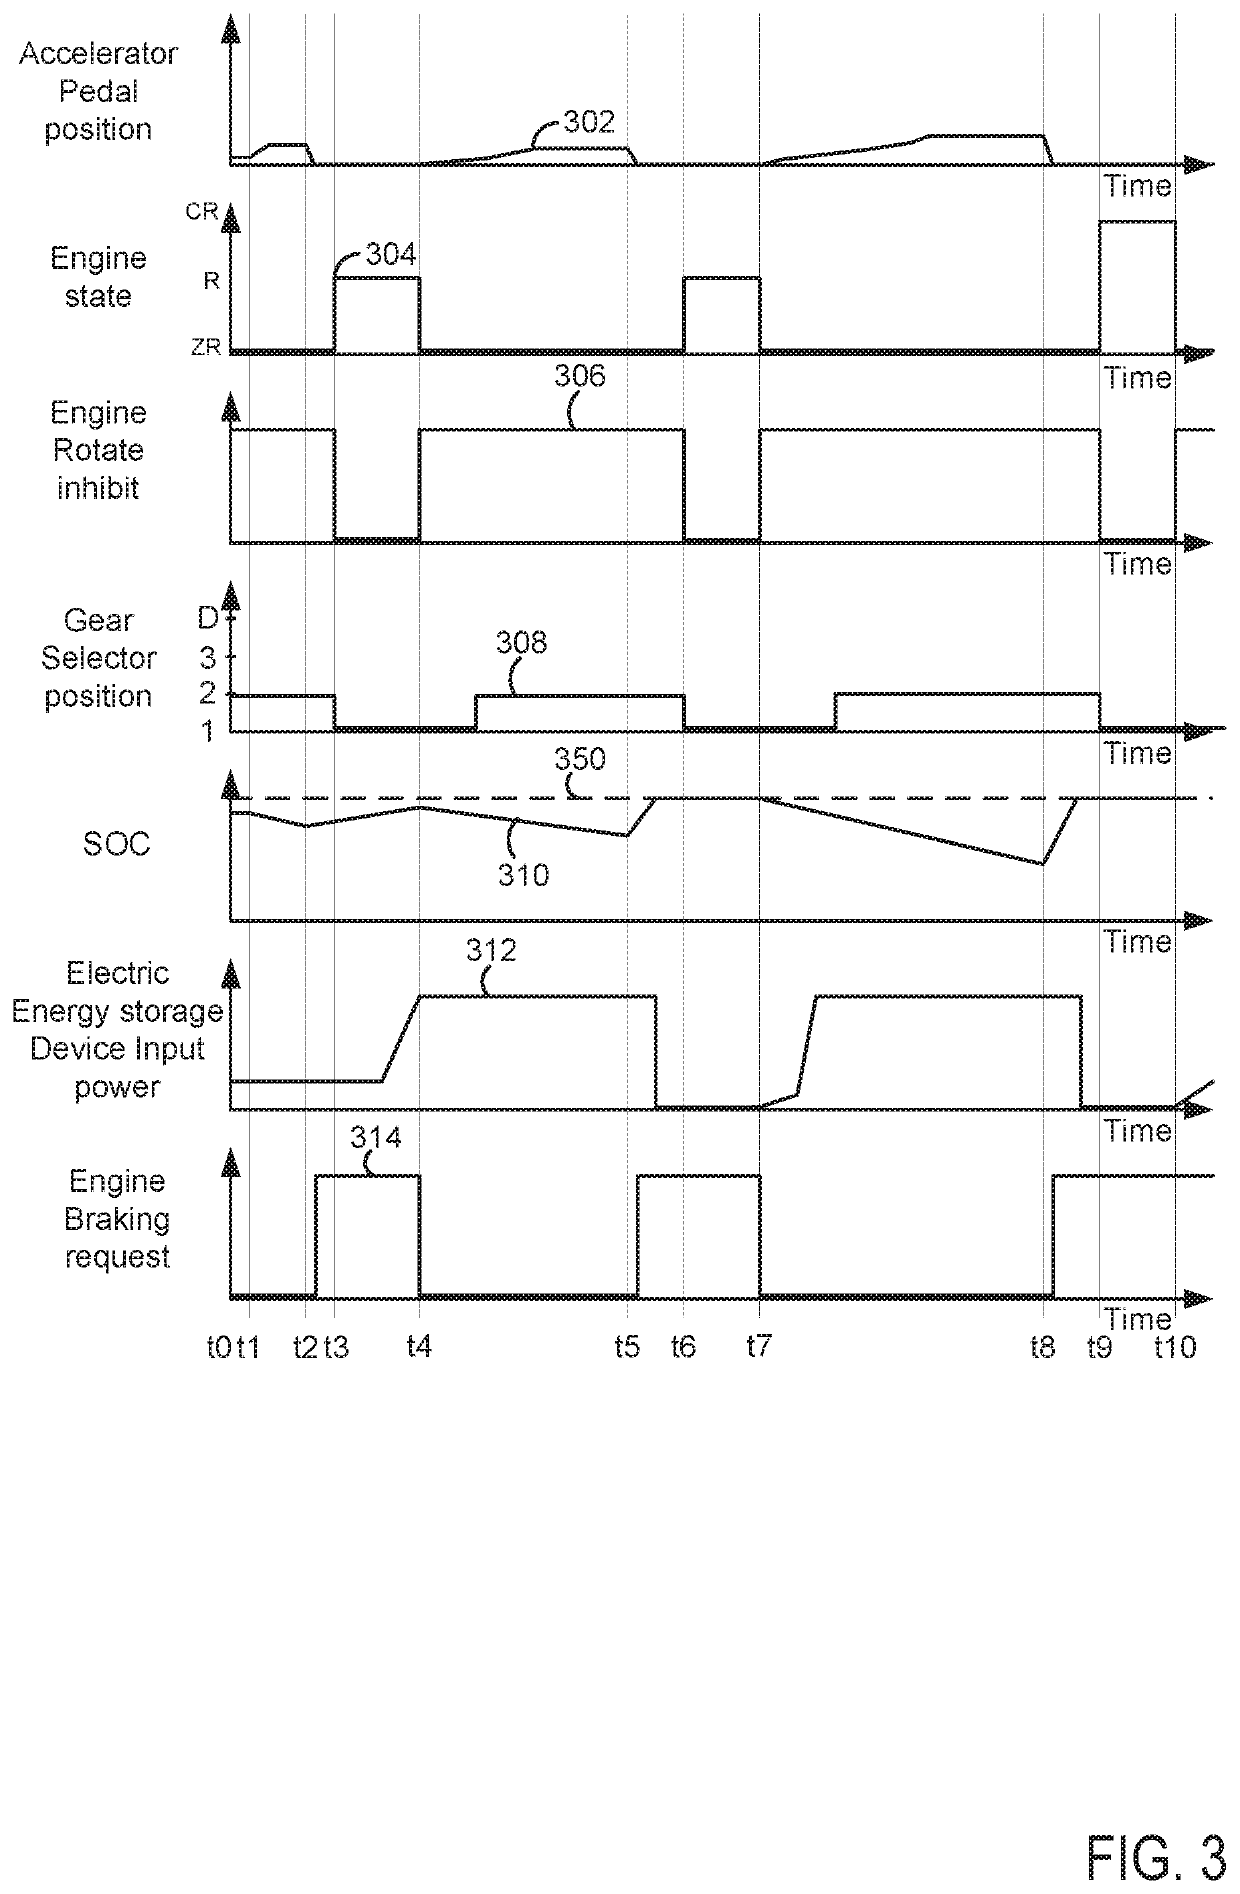 Methods and system for engine braking